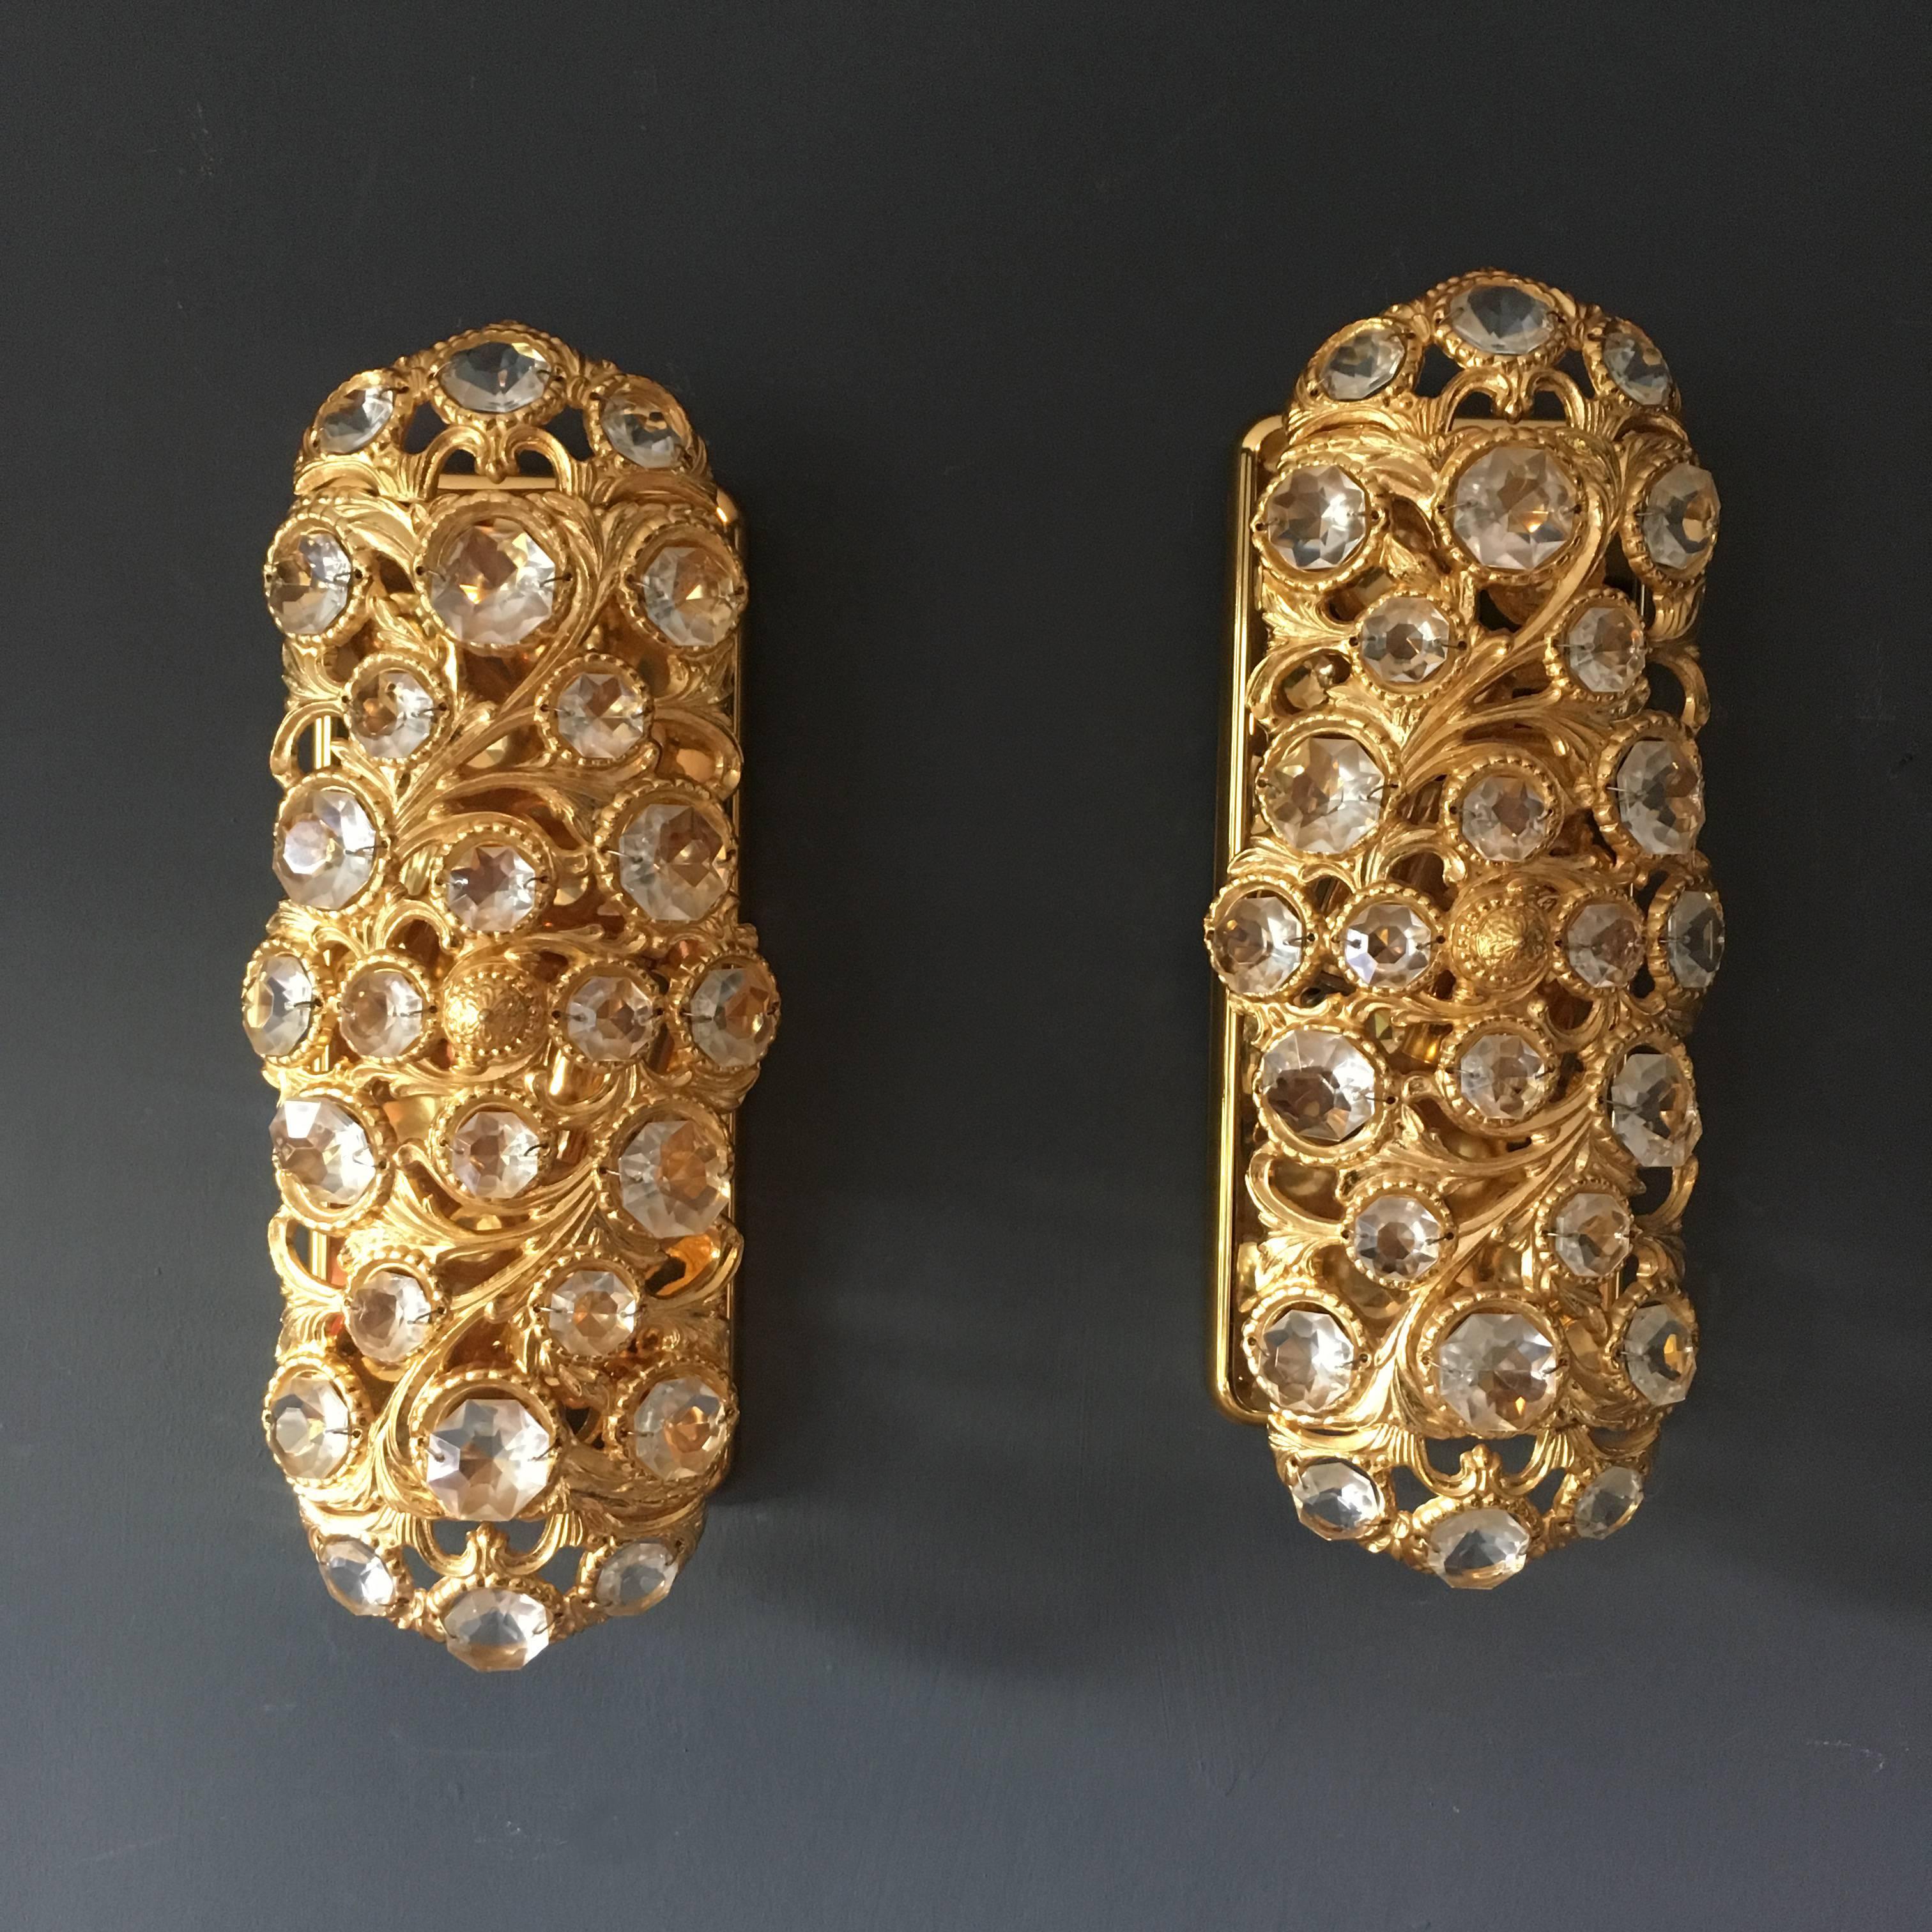 A pair of Peris Andreau gold toned crystal wall lights for S A Riper
Valencia, Spain, circa 1960s.
The lights are in a heavy gold toned metal with reverse prism glass crystals. The gold metalwork is crafted in a Baroque style pattern of swirling